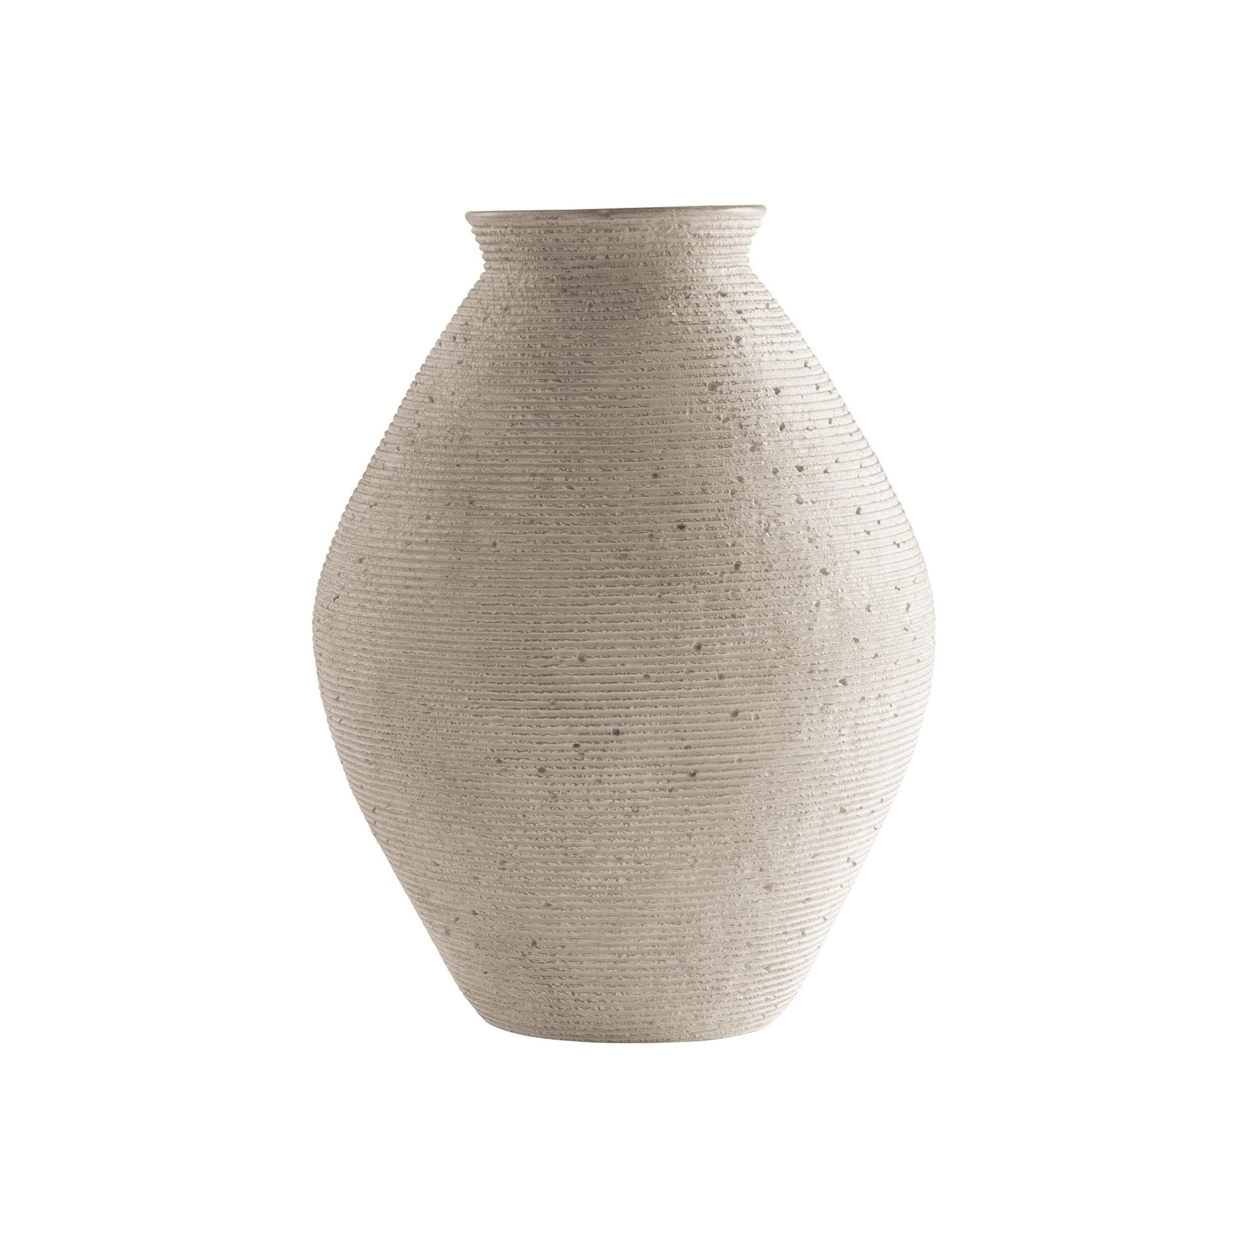 Dale 17 Inch Round Polyresin Vase, Tightly Ribbed Texture, Antique Beige- Saltoro Sherpi